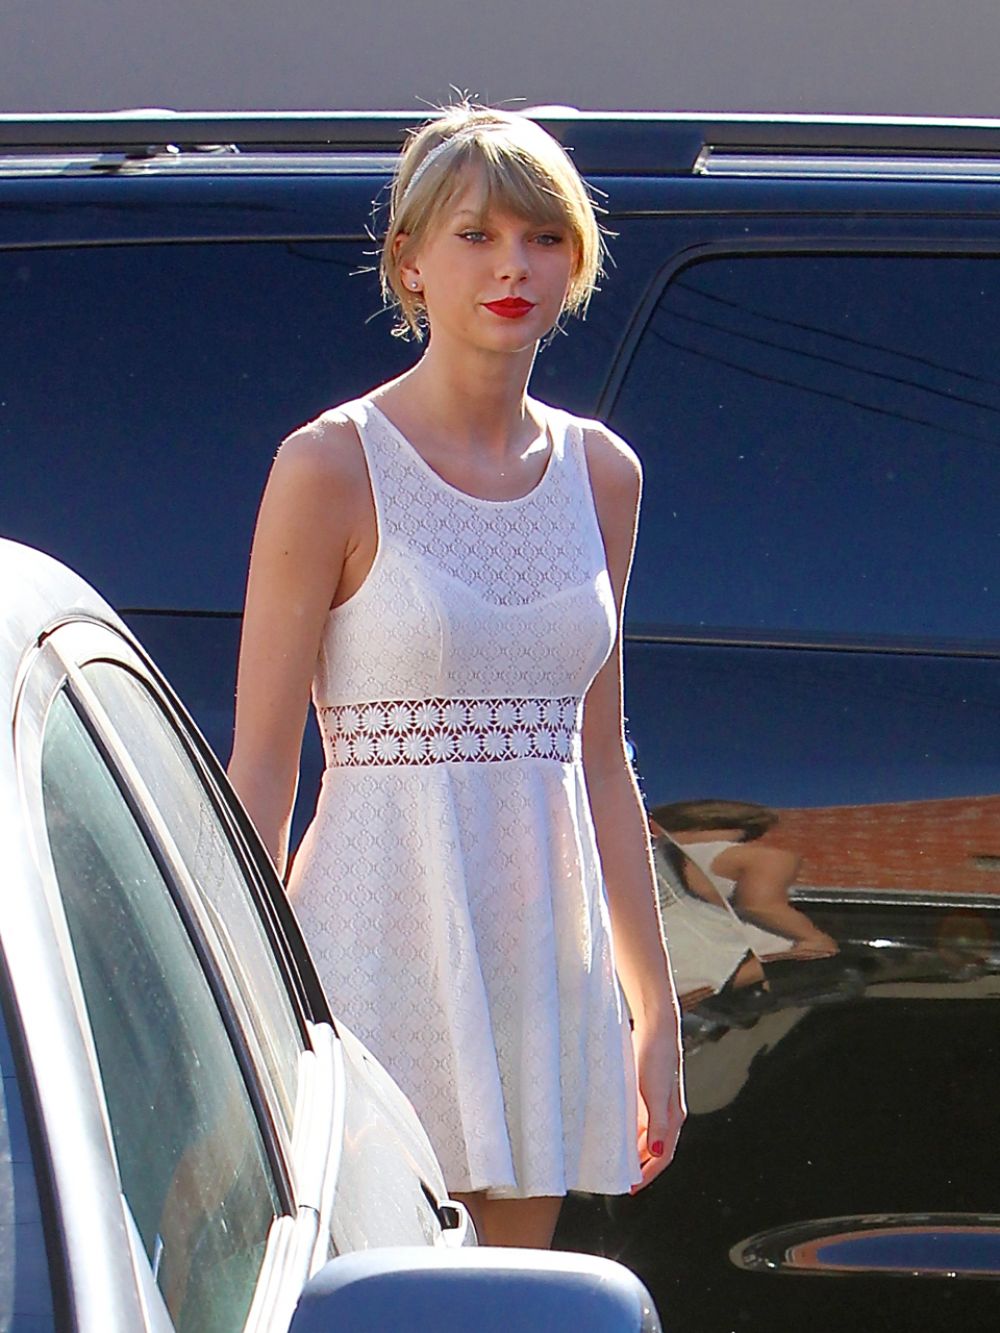 TAYLOR SWIFT in White Dress Out and About in Los Angeles – HawtCelebs